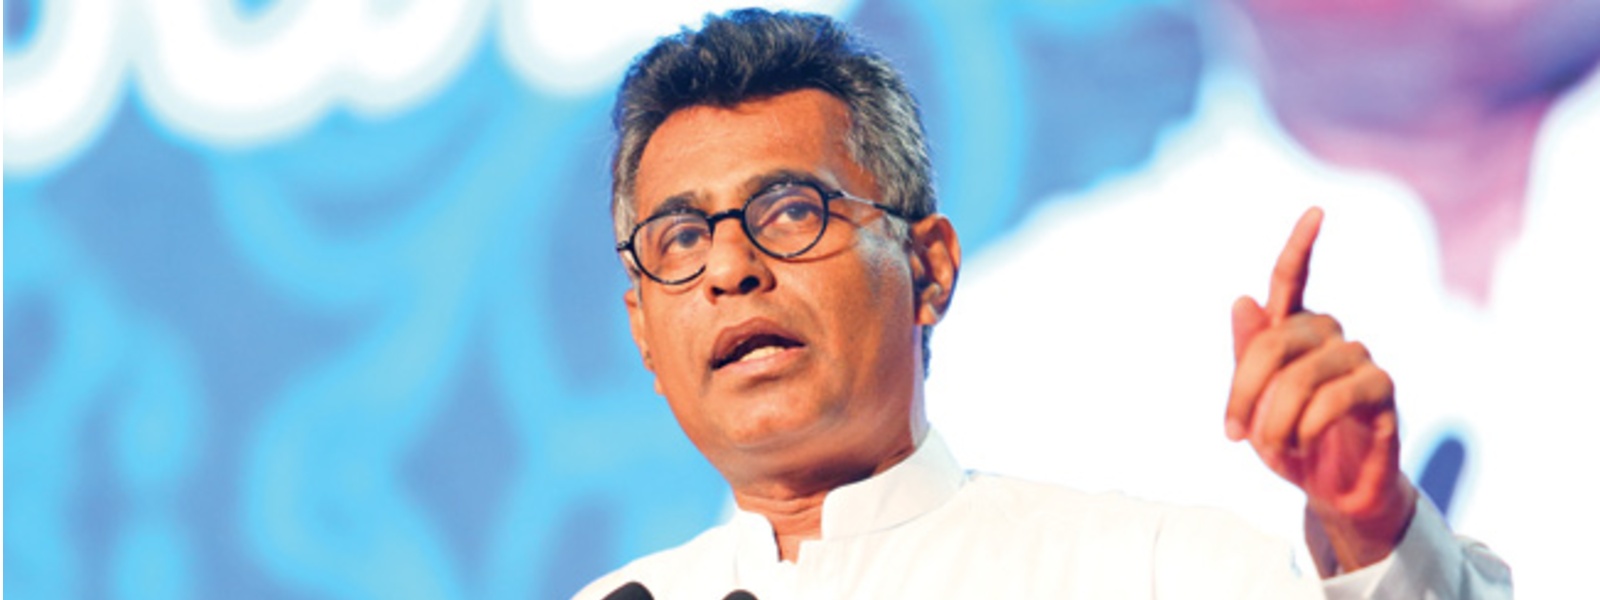 We expect President not to play games: Patali